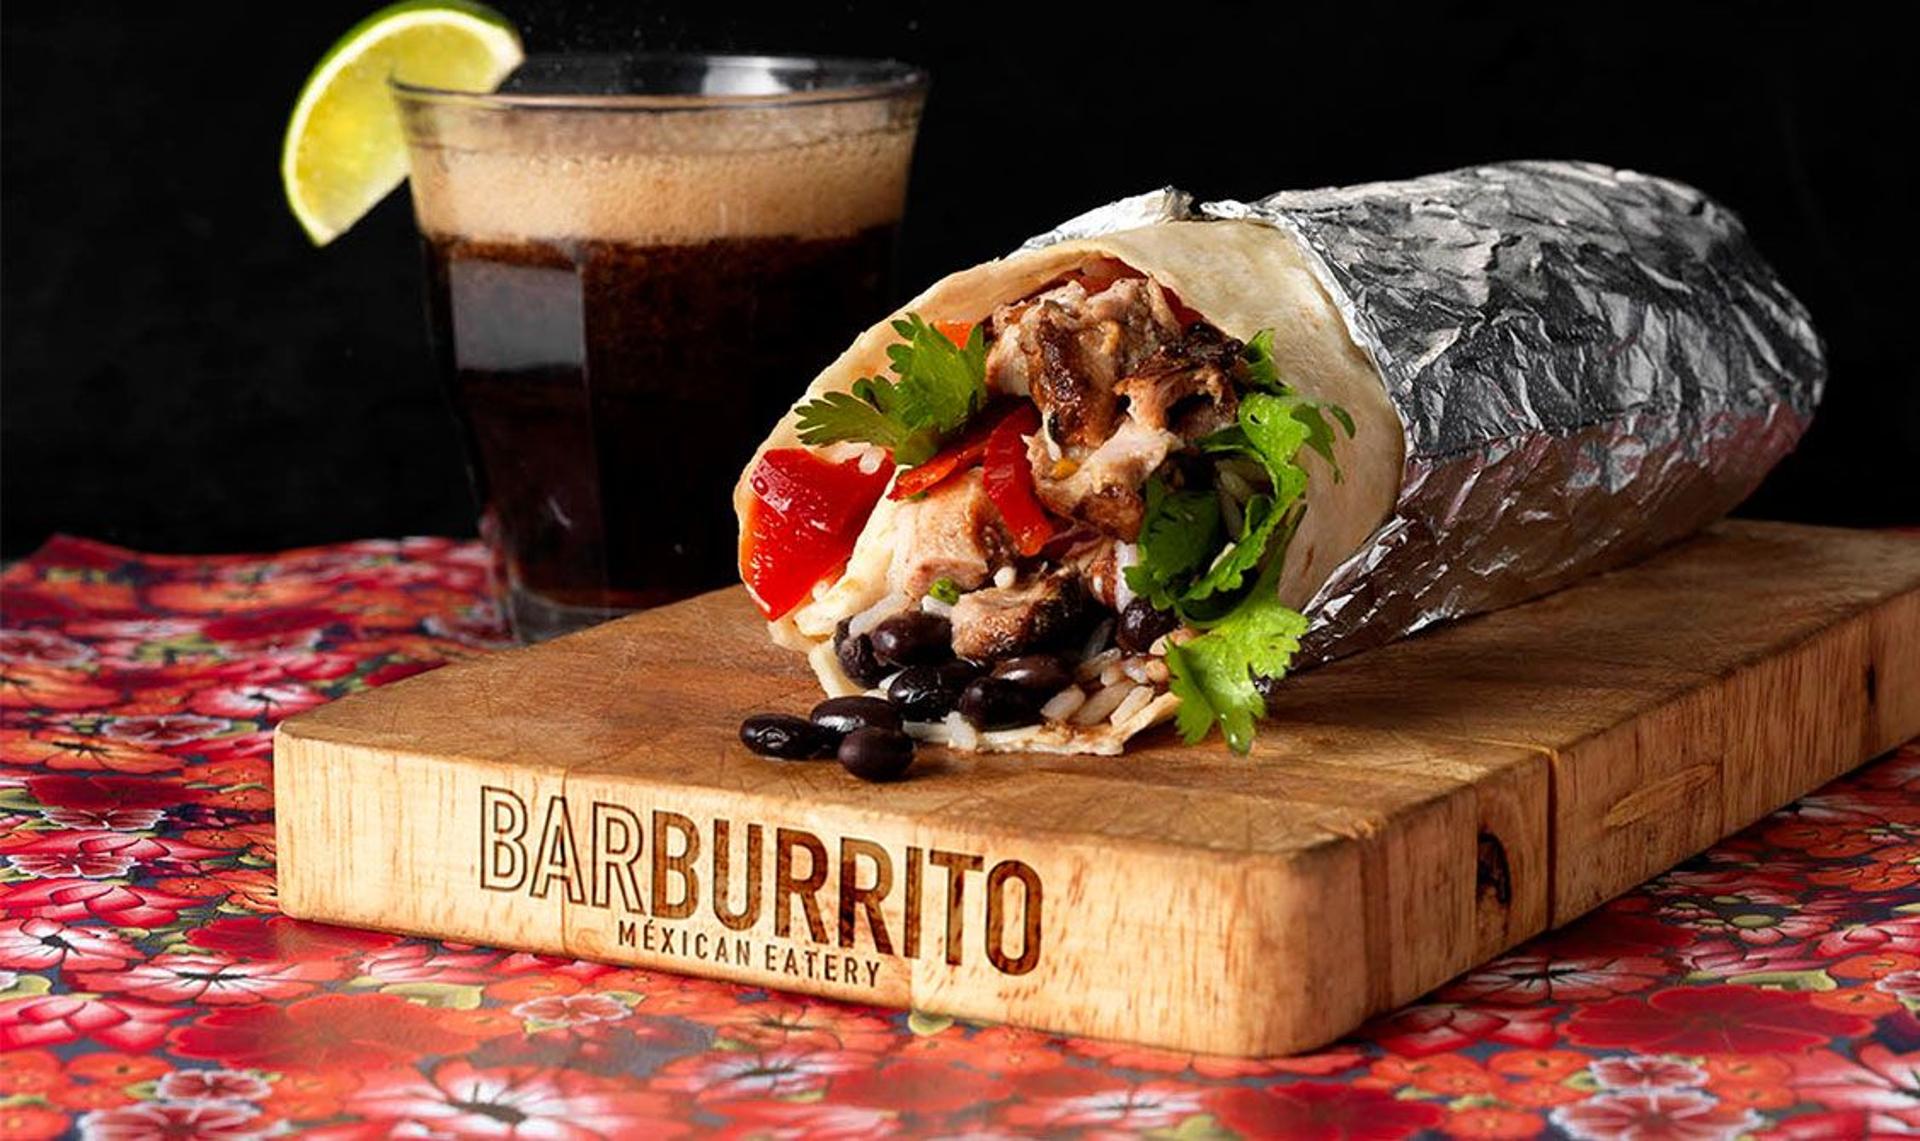 Barburrito acquired by The Restaurant Group at 4x profits 